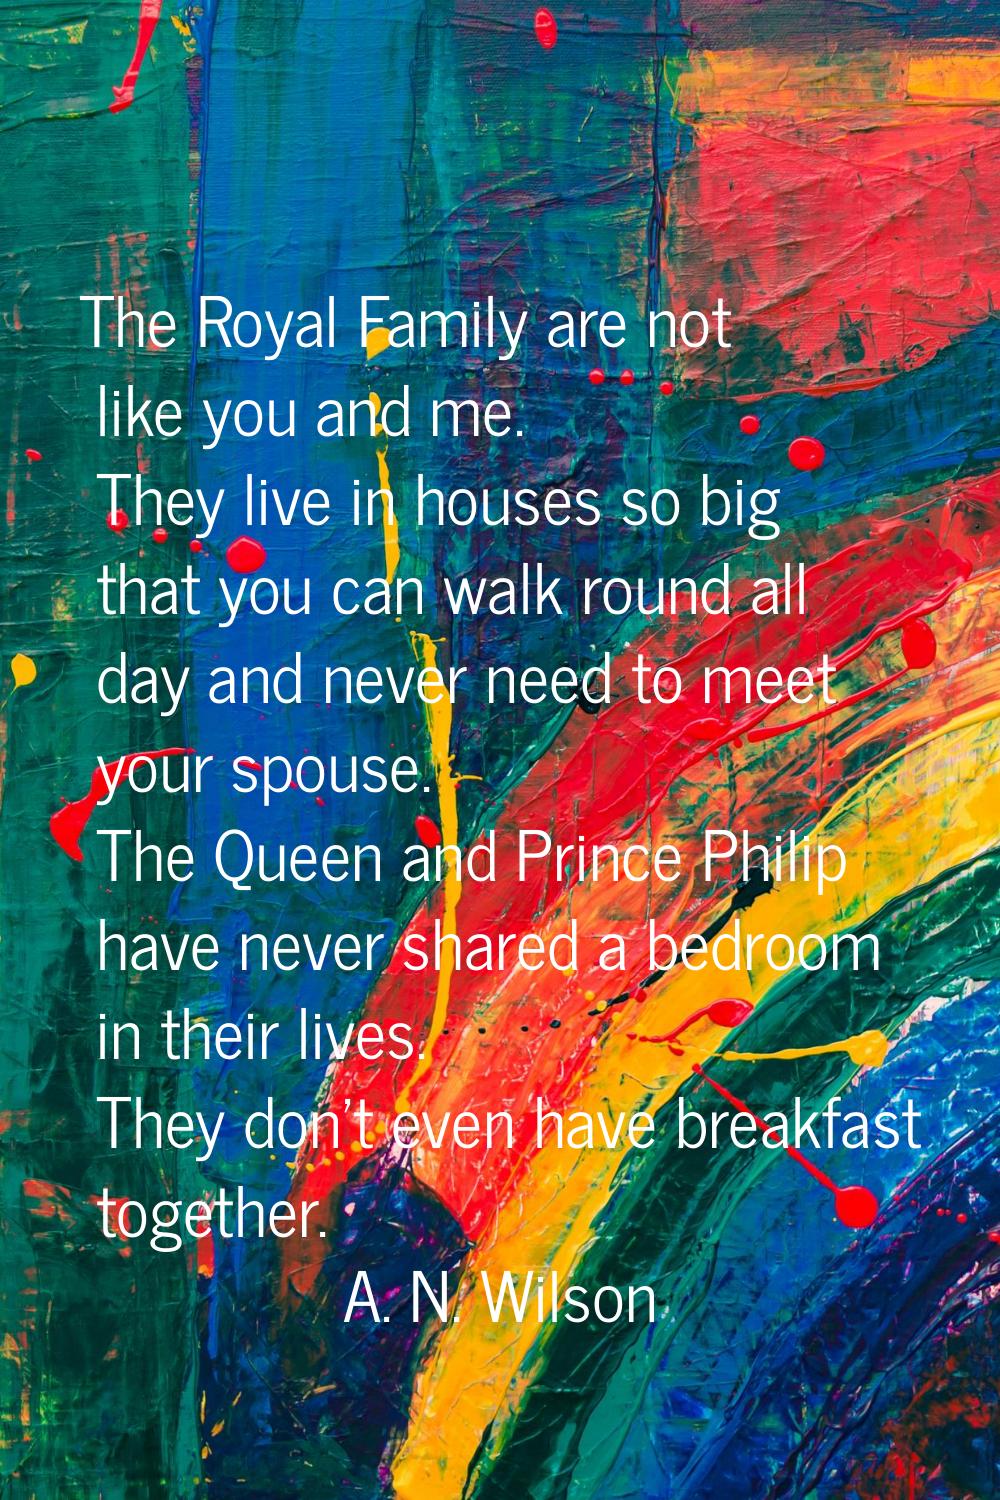 The Royal Family are not like you and me. They live in houses so big that you can walk round all da